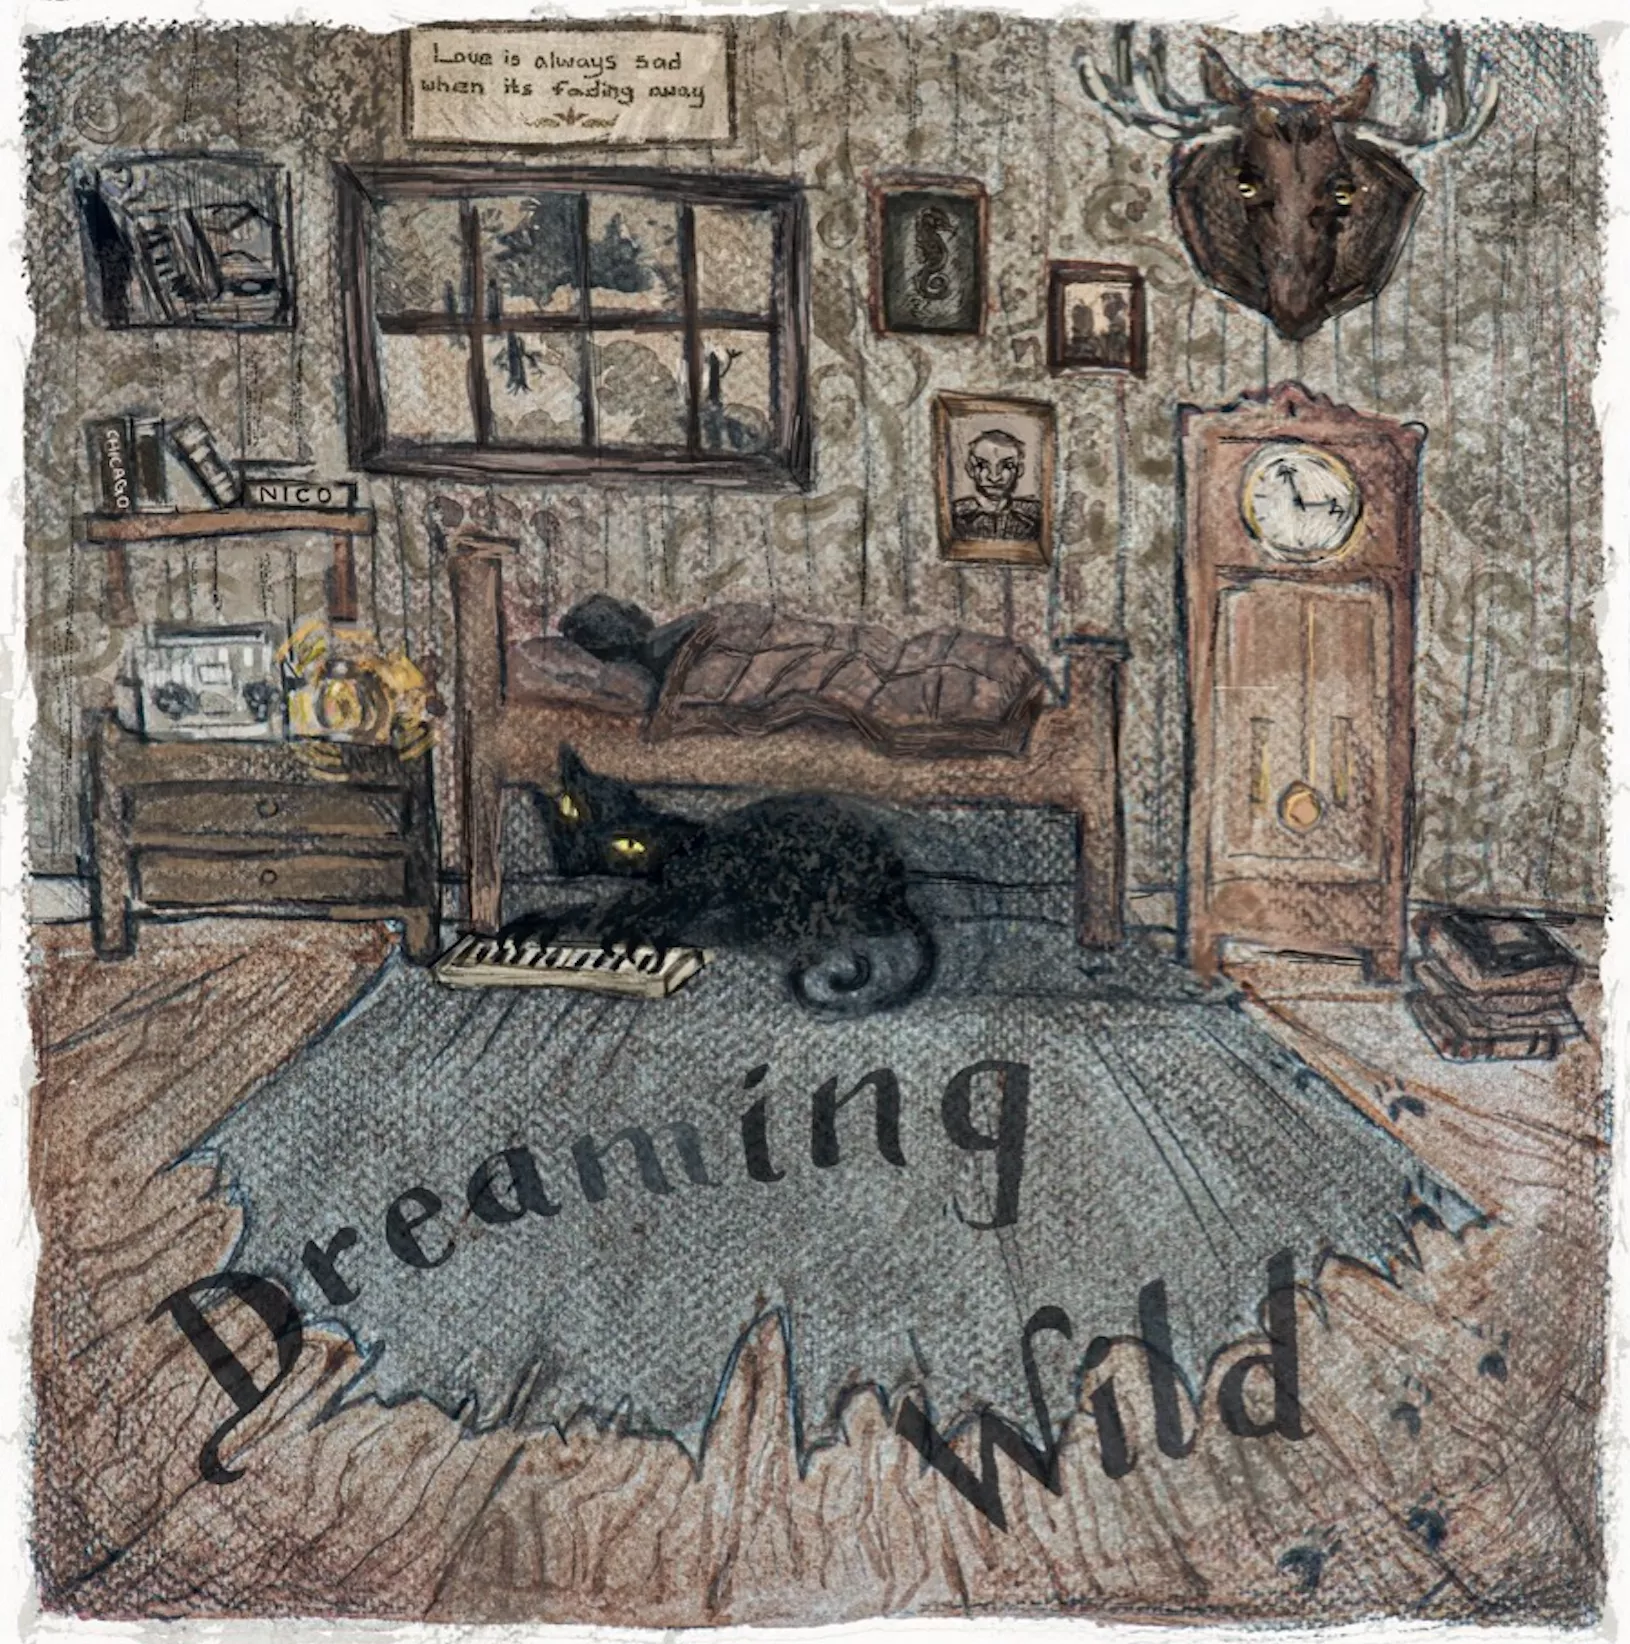 Dreaming Wild - Dreaming Wild